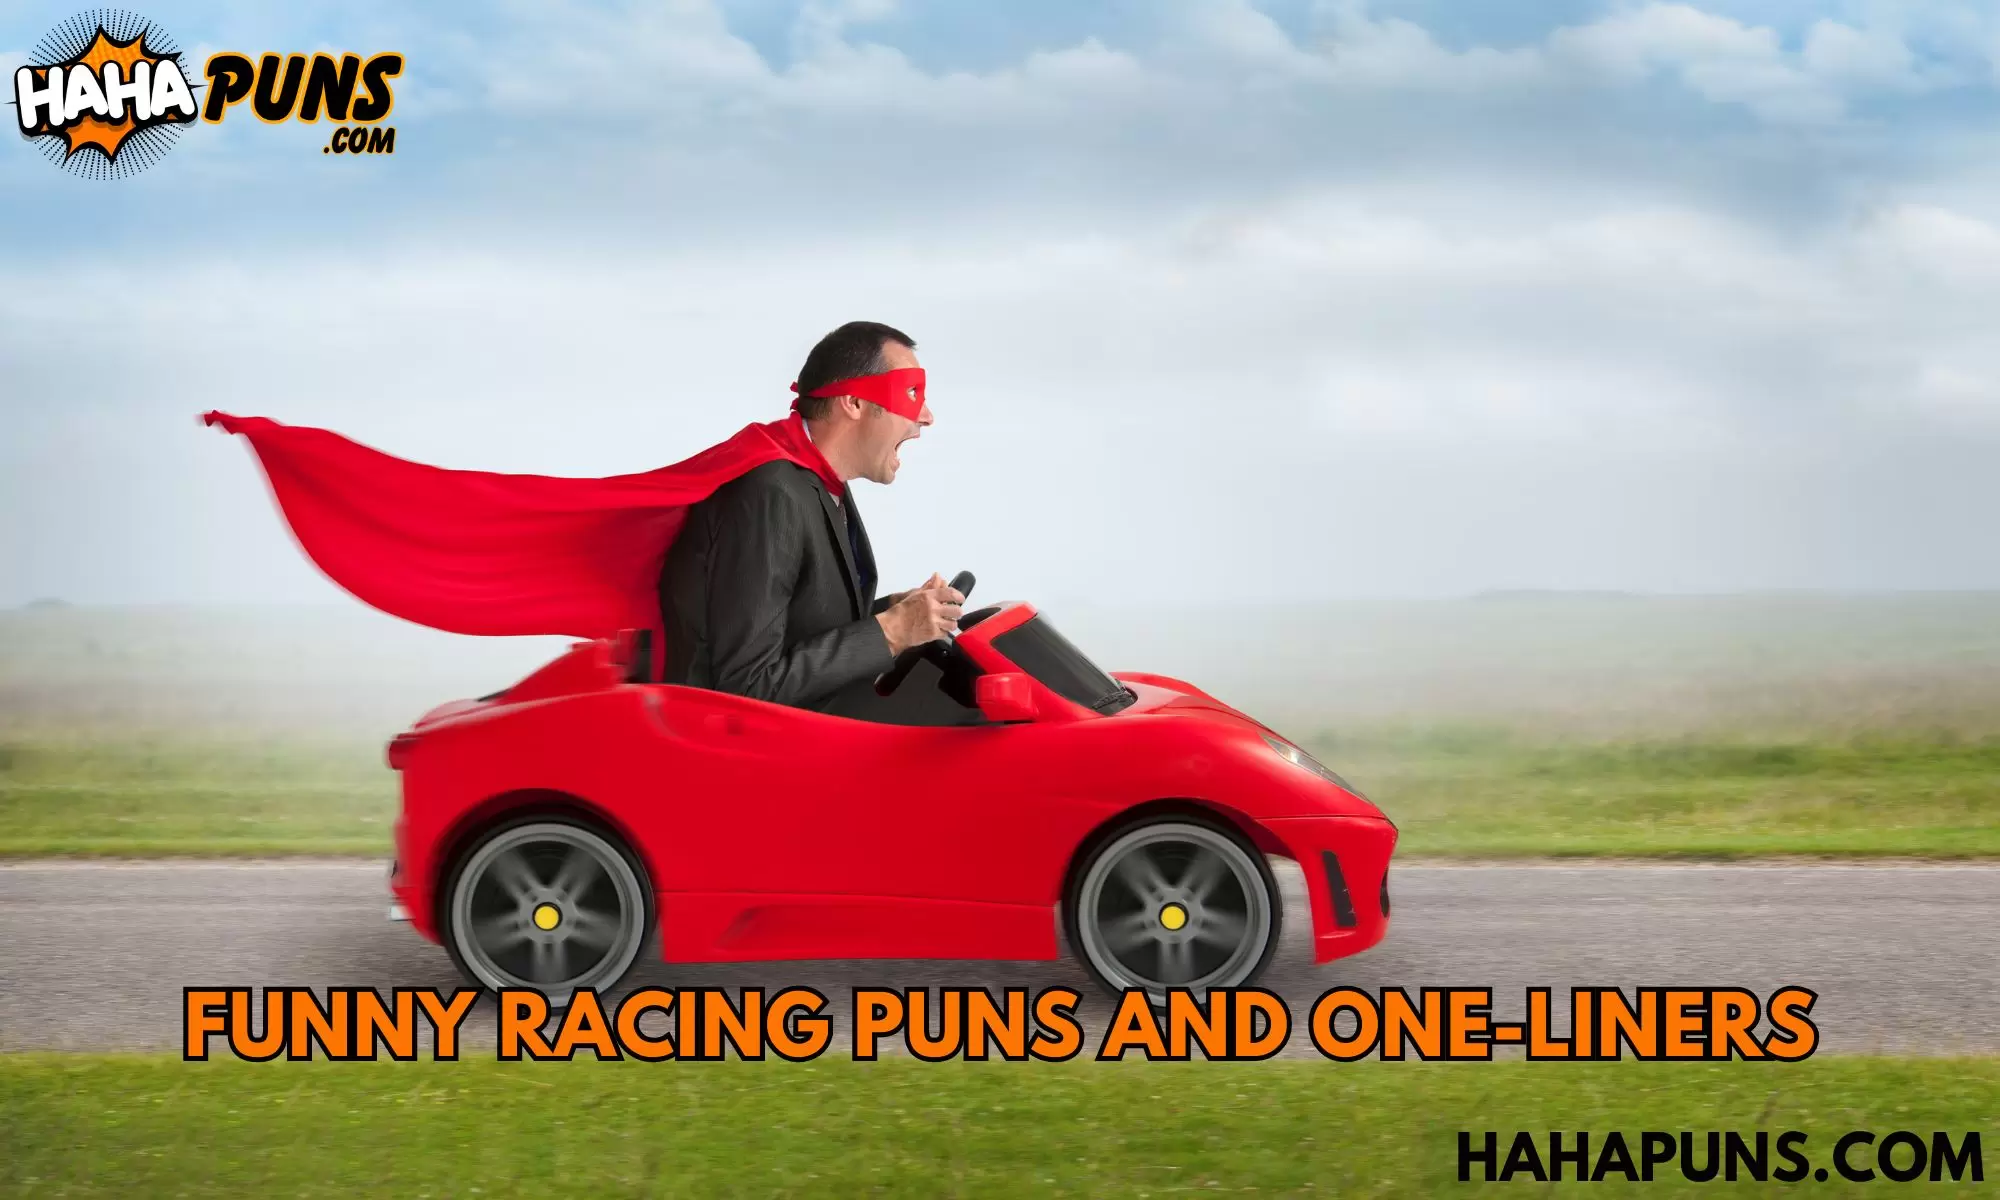 Funny Racing Puns And One-Liners